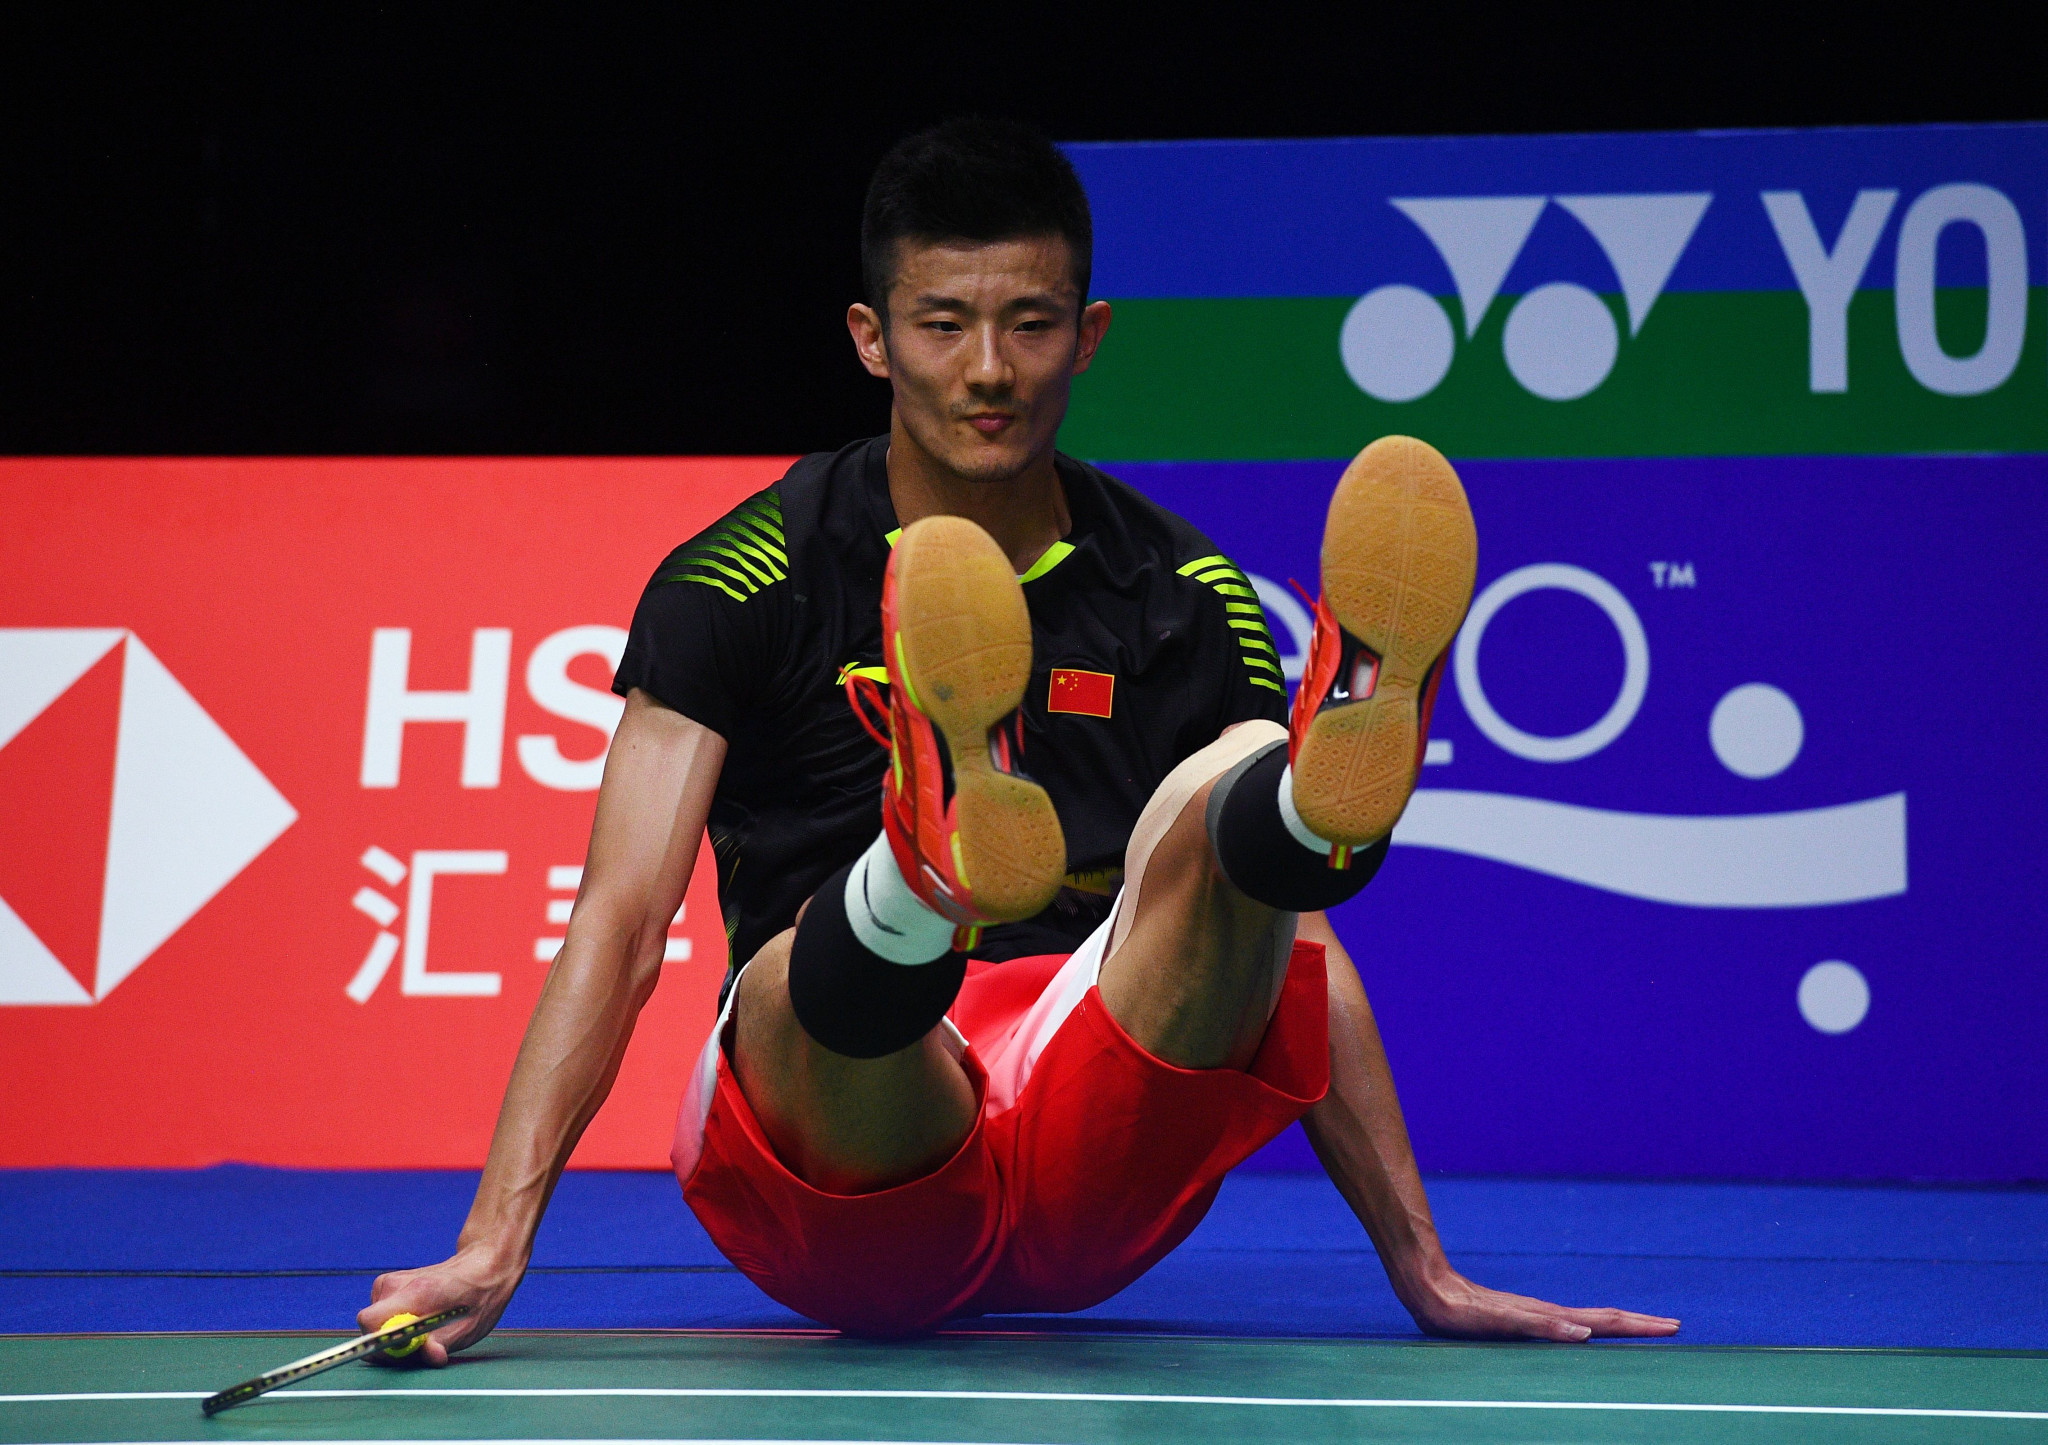 Top seeds and defending singles champions beaten at Badminton World